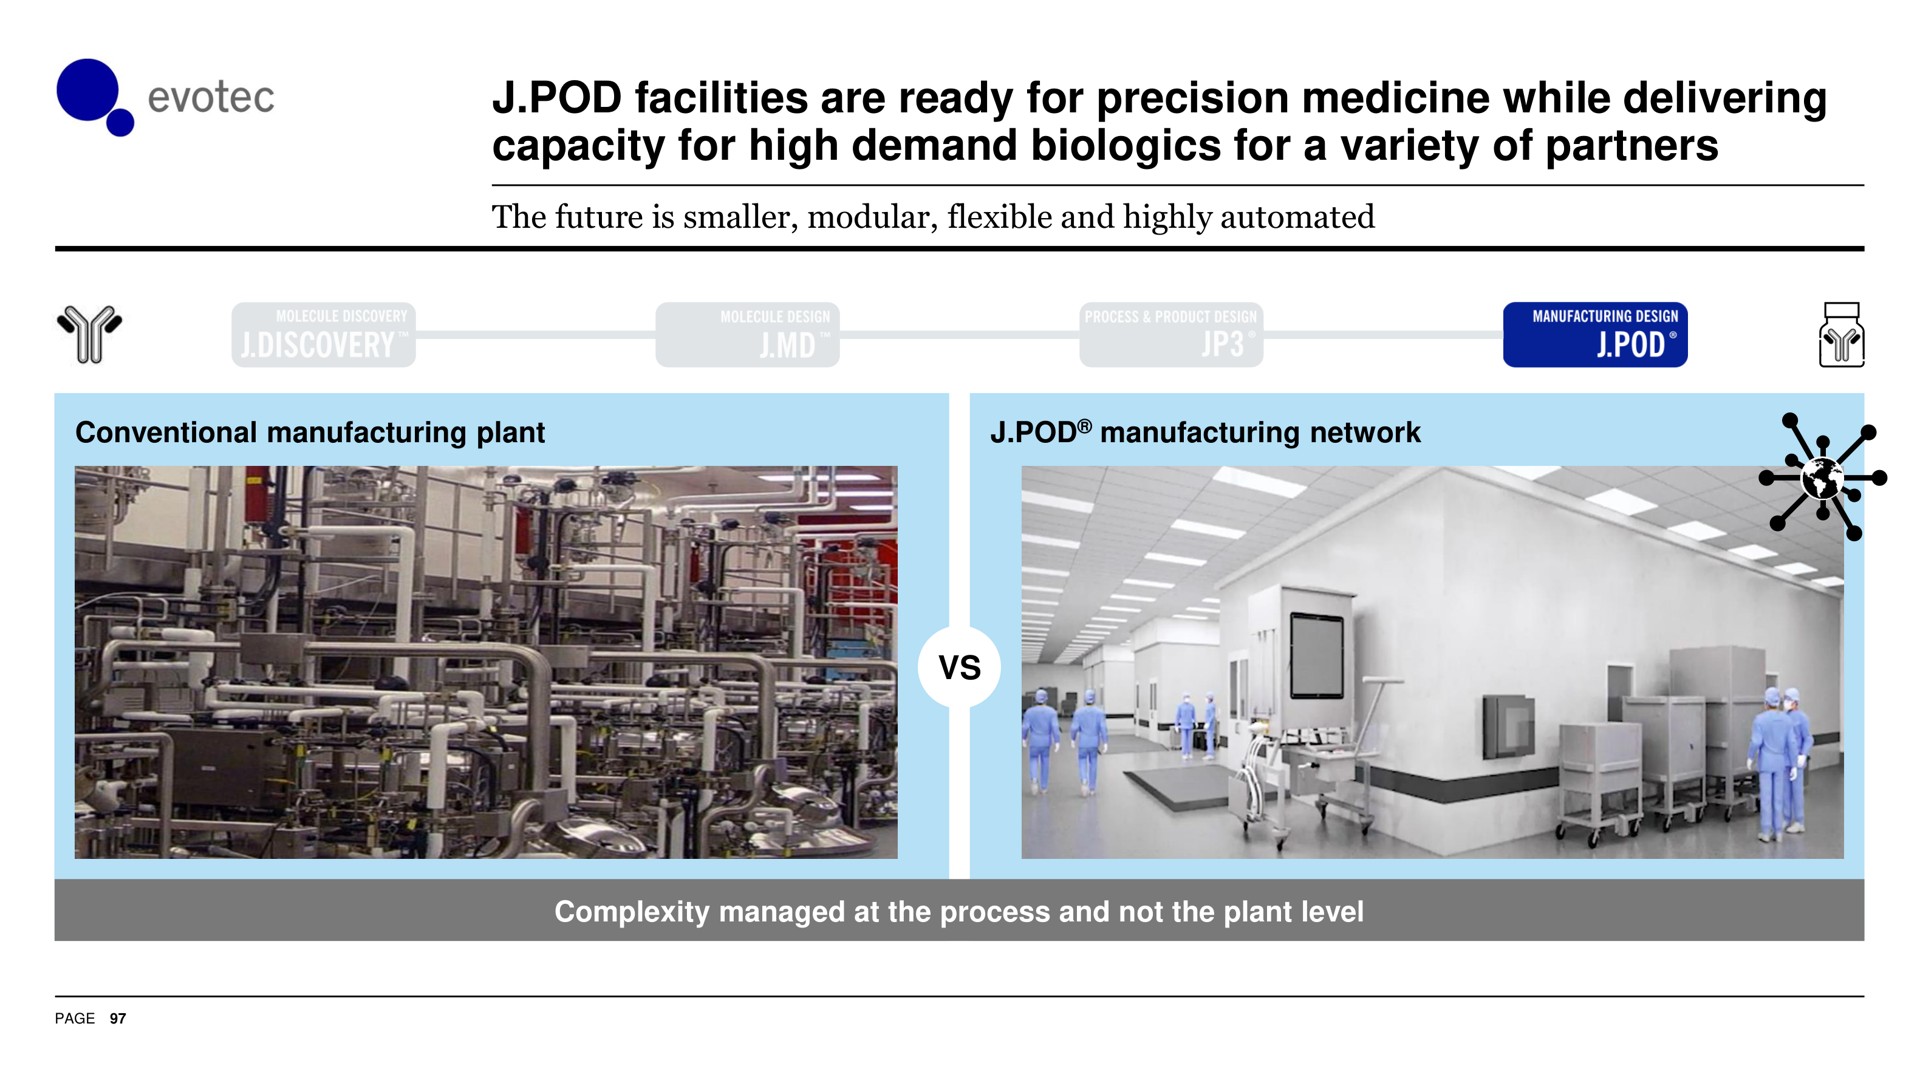 pod facilities are ready for precision medicine while delivering capacity for high demand for a variety of partners | Evotec